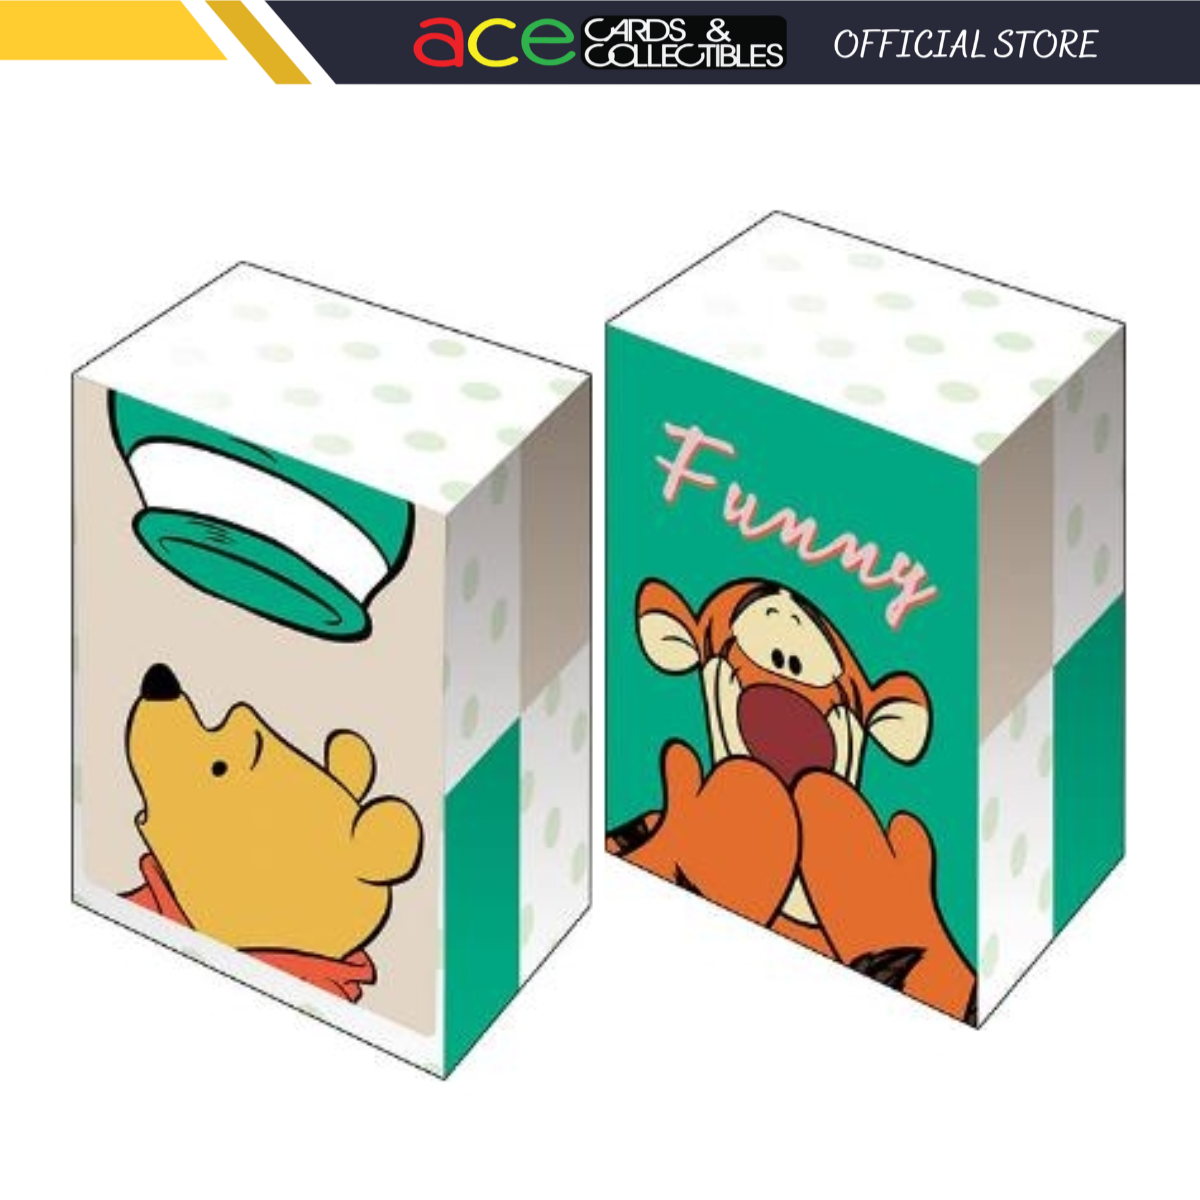 Bushiroad Deck Holder V3 - Disney - "Winnie The Pooh" (Vol.485)-Bushiroad-Ace Cards & Collectibles